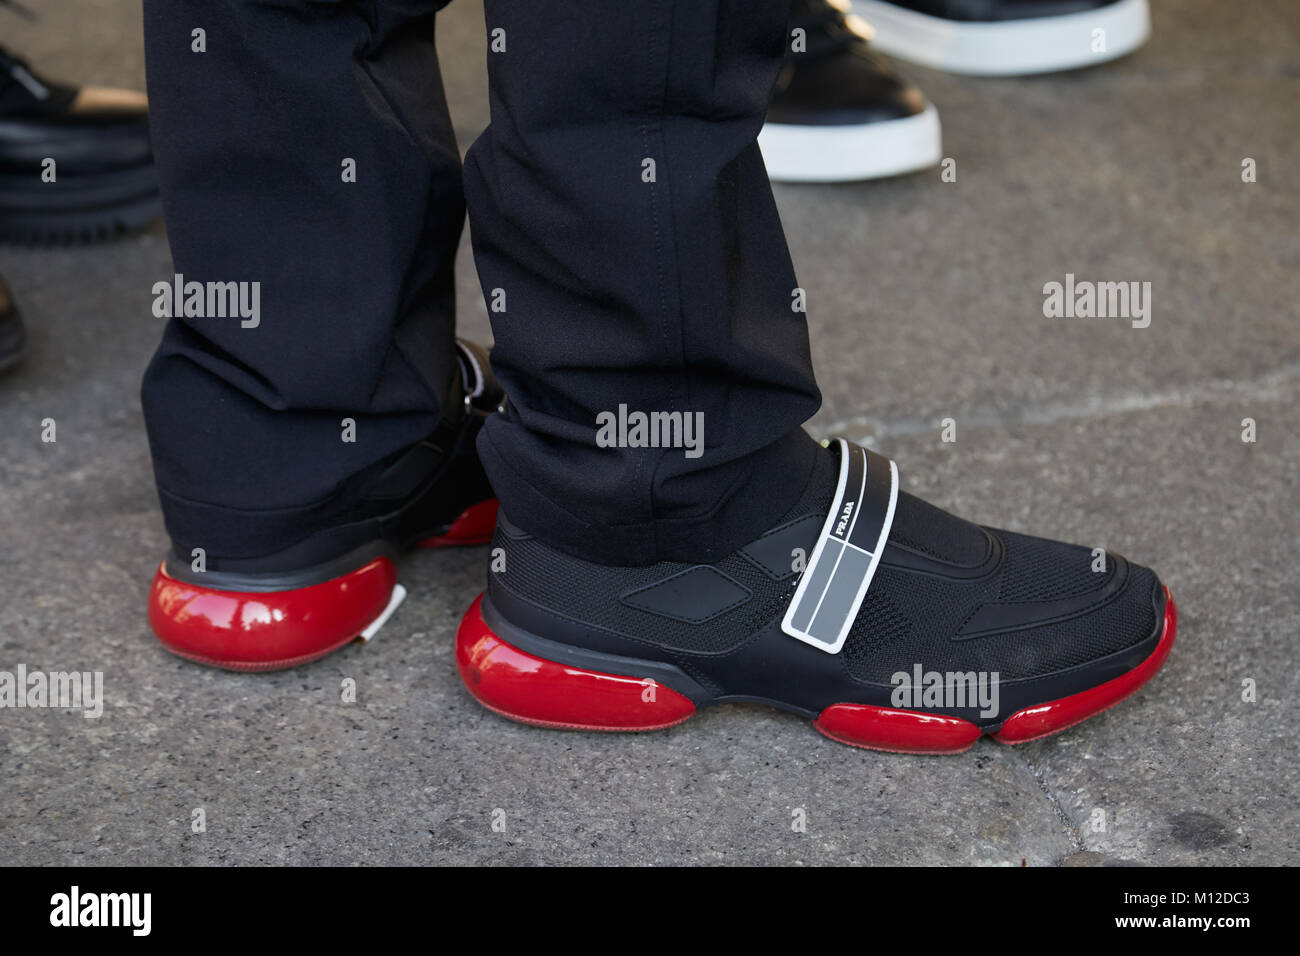 MILAN - JANUARY 14: Man with black and red Prada shoes before MSGM Stock  Photo - Alamy